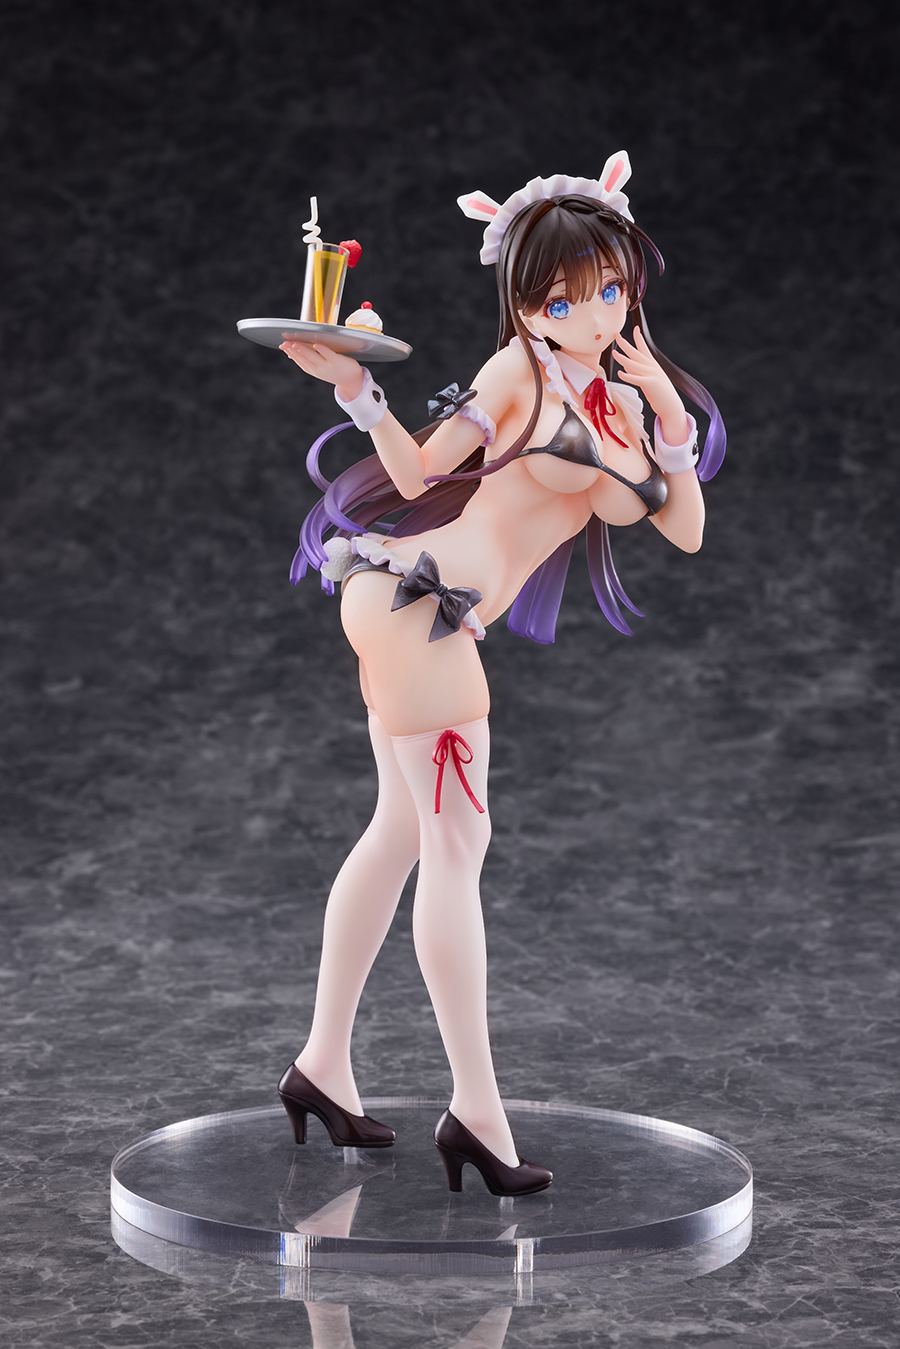 Original Character 1/6 Scale Pre-Painted Figure: Cocoa illustration by DSmile Sky Tube